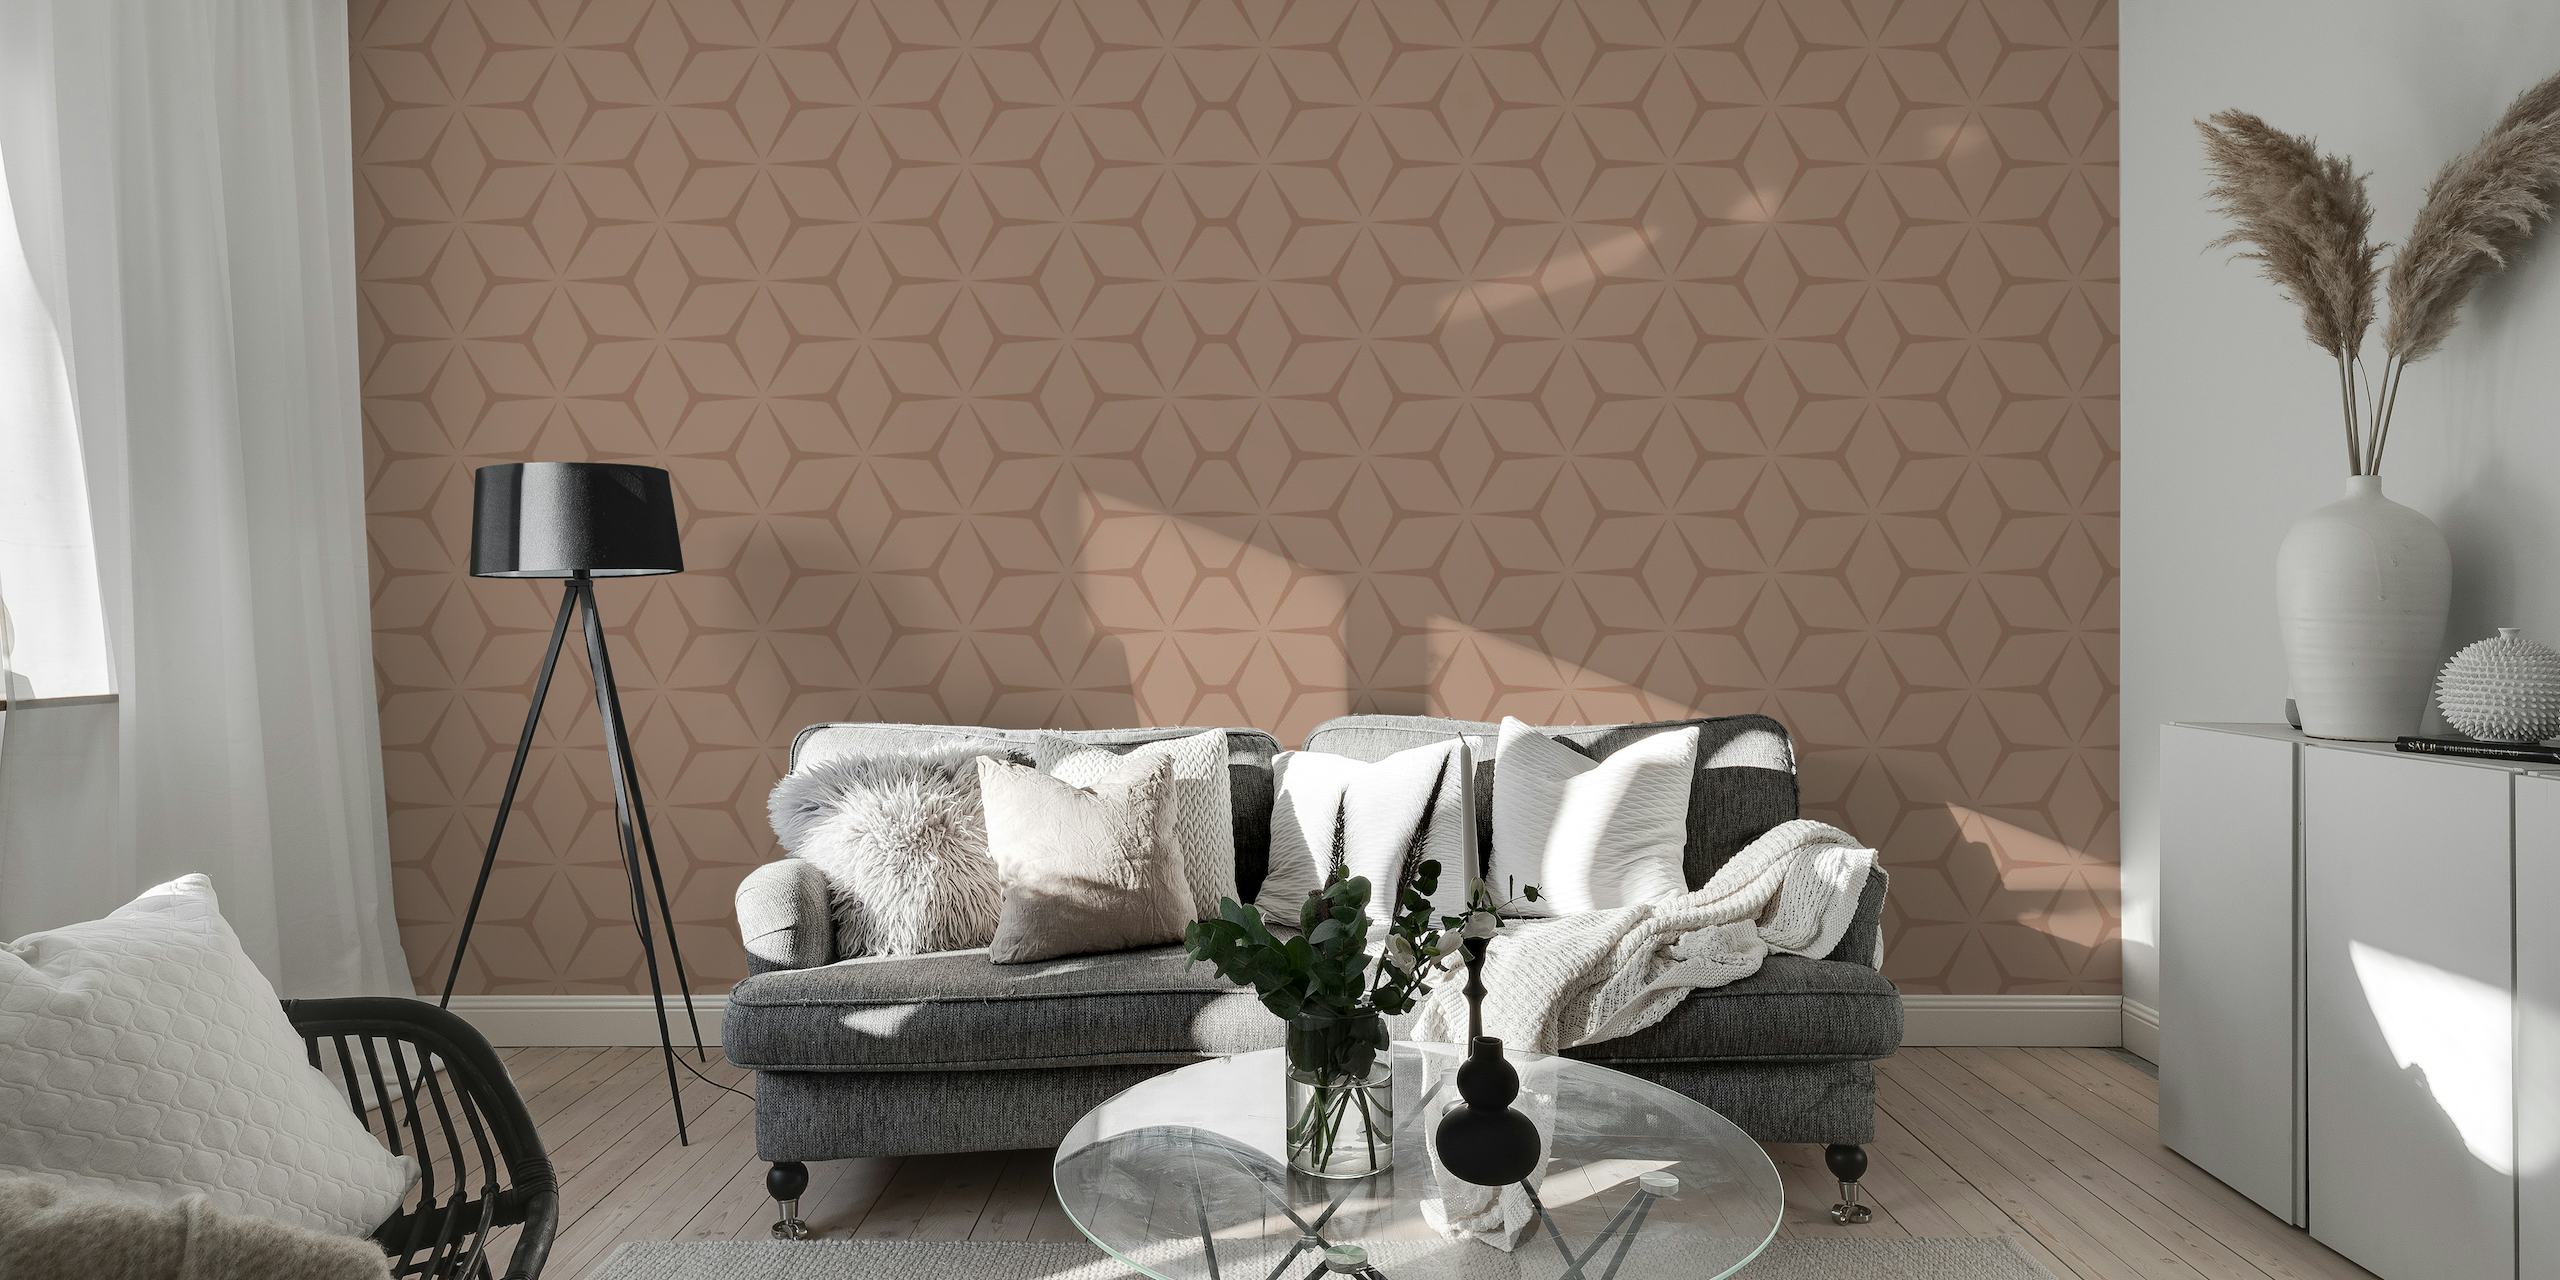 Mid Century Sienna wall mural featuring a geometric retro pattern on a warm sienna background.